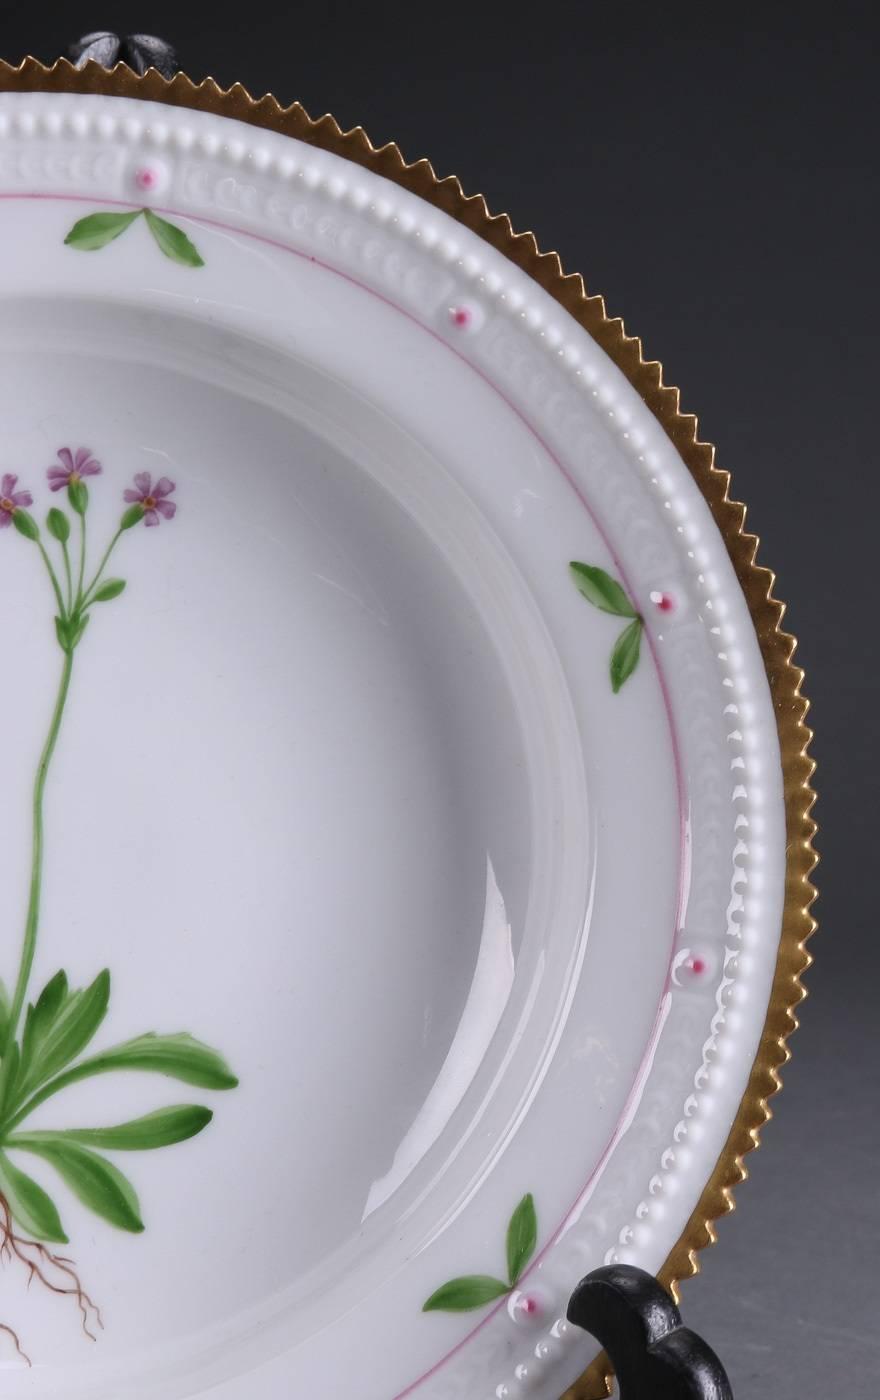 Royal Copenhagen, deep plate, decorated with flowers, Primula stricta horn, hand-painted. Manufactured in Denmark for a short period between 1889-1922.
Decoration number 735 which is a simplified version of the exclusive Flora Danica dinner